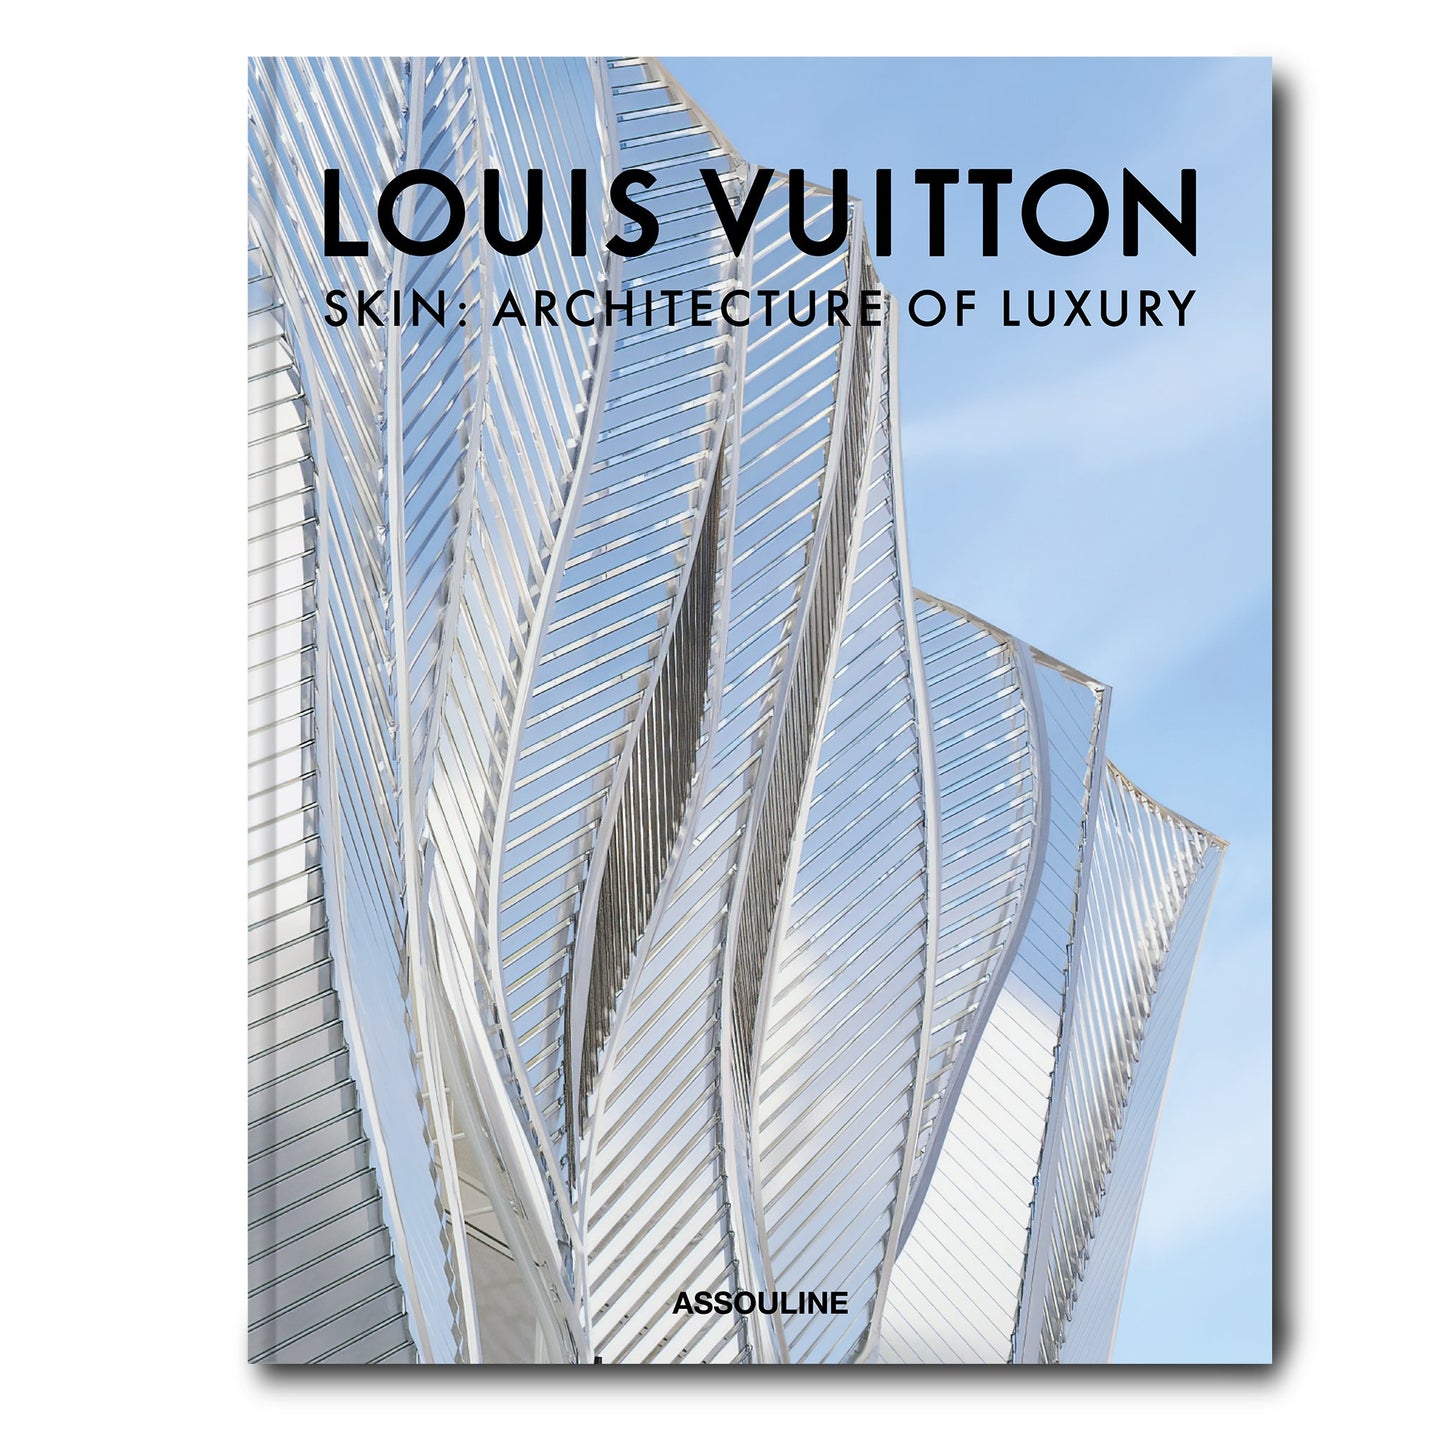 Louis Vuitton Skin: Architecture of Luxury (Singapore Edition) by Paul  Goldberger - Coffee Table Book